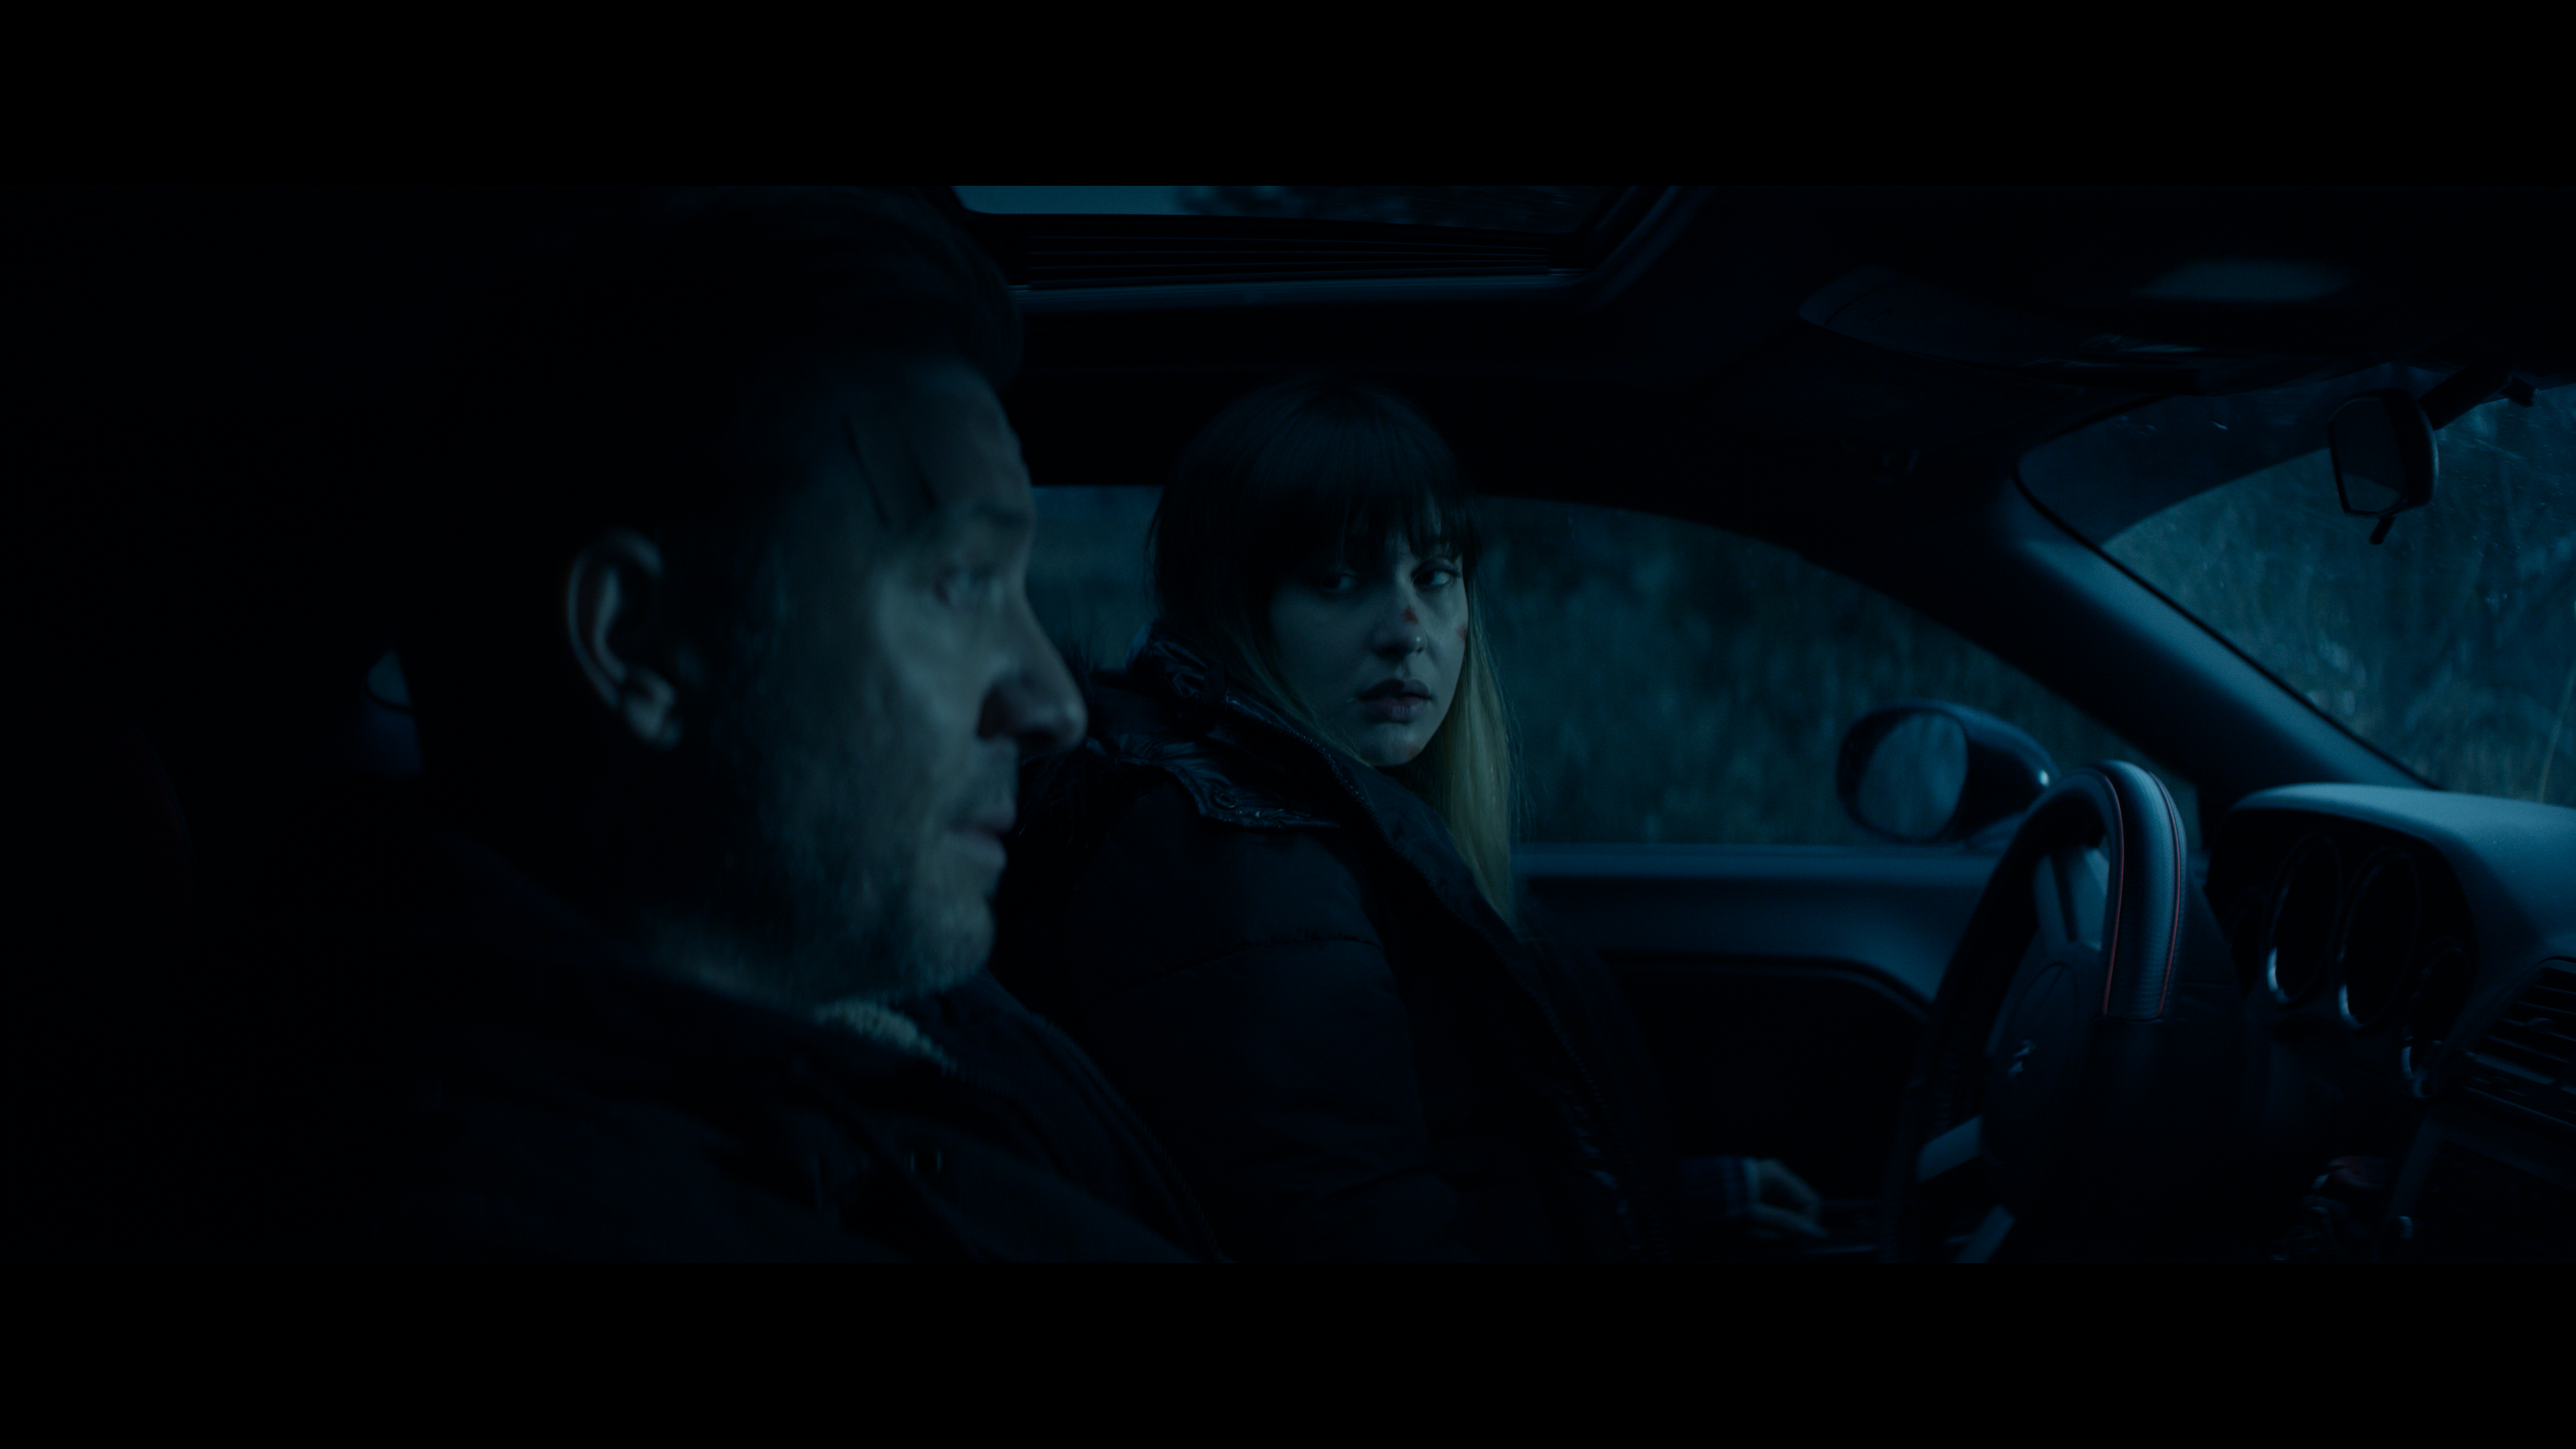 The Last Mark starring Shawn Doyle and Alexia Fast